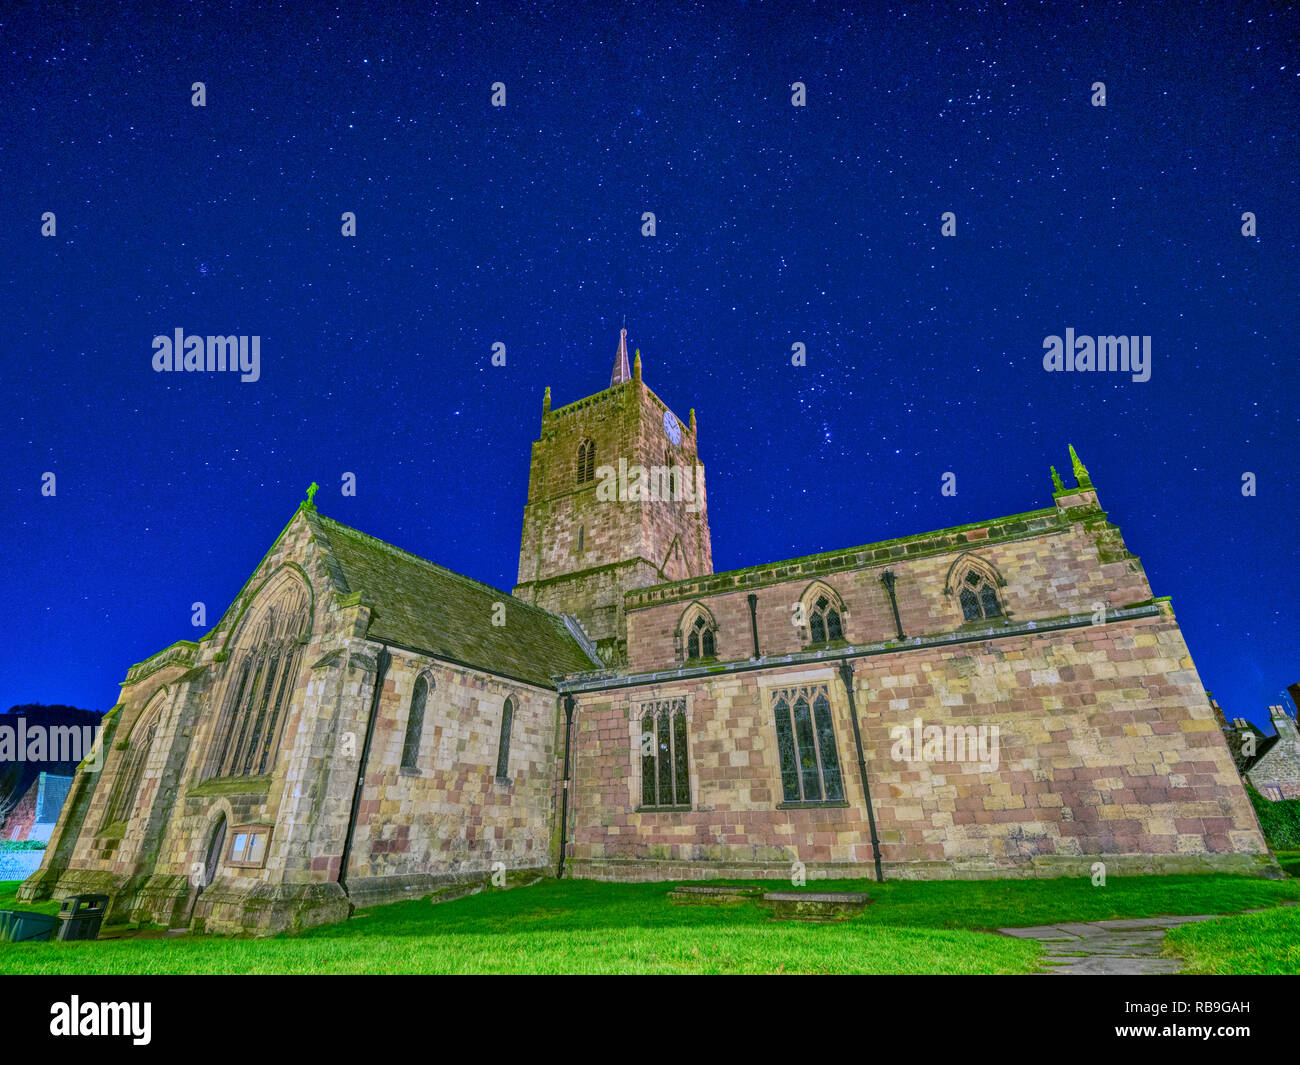 Wirksworth, Derbyshire, Peak District, UK. 8th January, 2019. UK Weather: cold clear stars in the night sky St. Mary's Church, Wirksworth, Derbyshire, Peak District Credit: Doug Blane/Alamy Live News Stock Photo